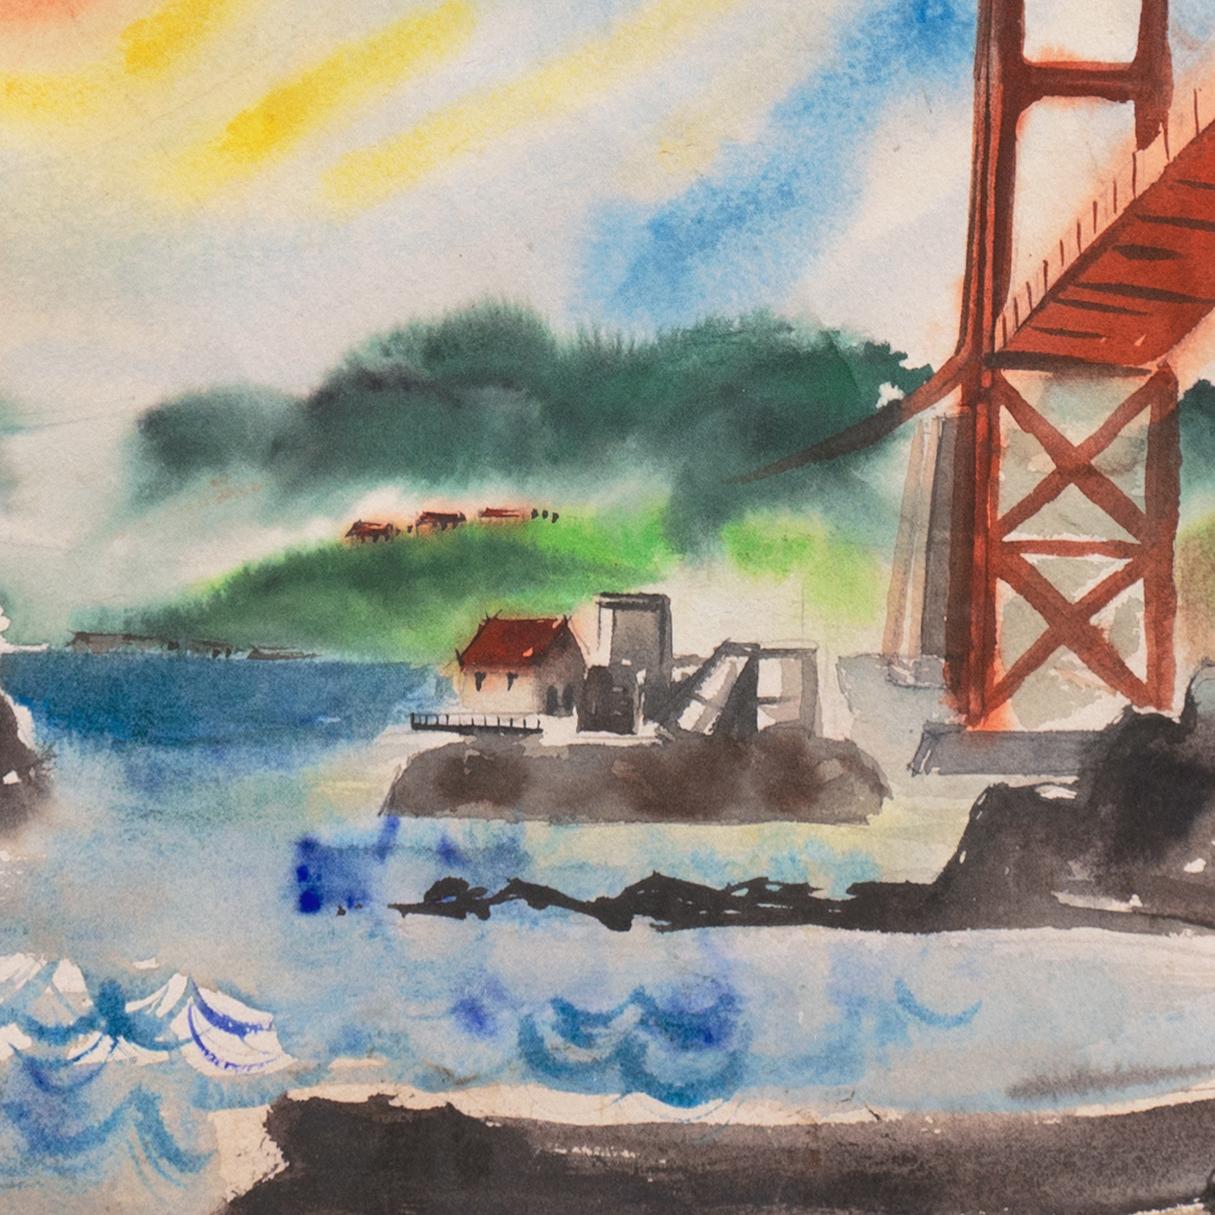 Signed lower left, 'Elizabeth Flynn' (American, 20th century) and painted circa 1965.

A sunny, modernist view of California's Golden Gate Bridge viewed from Sausalito's Lime Point Lighthouse and painted with bravura brushwork by this mid-century,